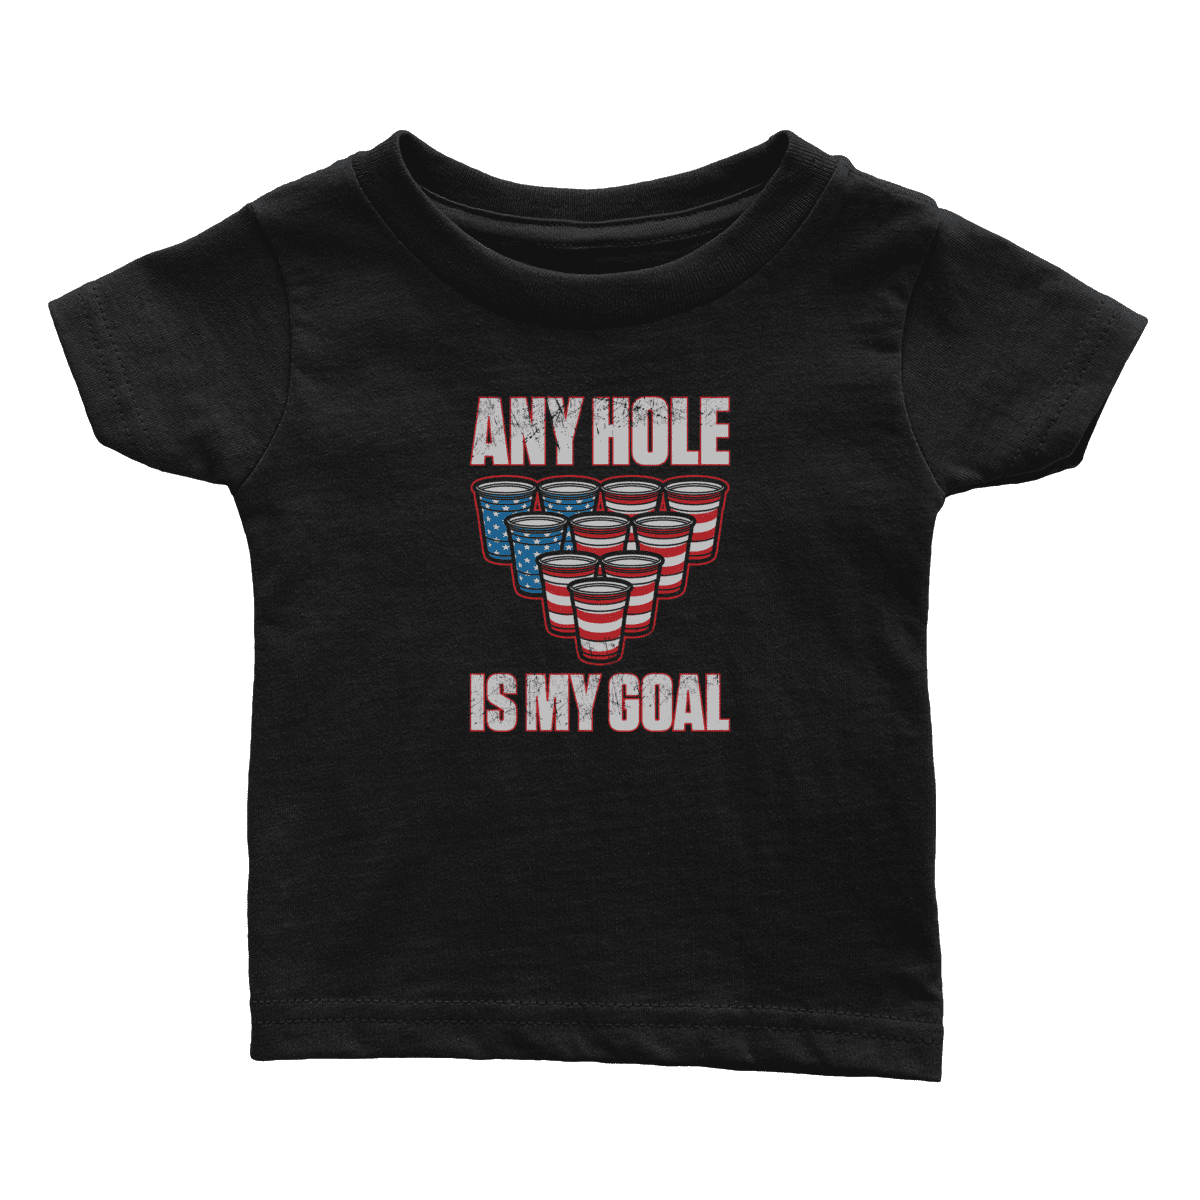 Apparel Premium Infant Shirt / Black / 6 Months Any Hole is My Goal - Rugrats